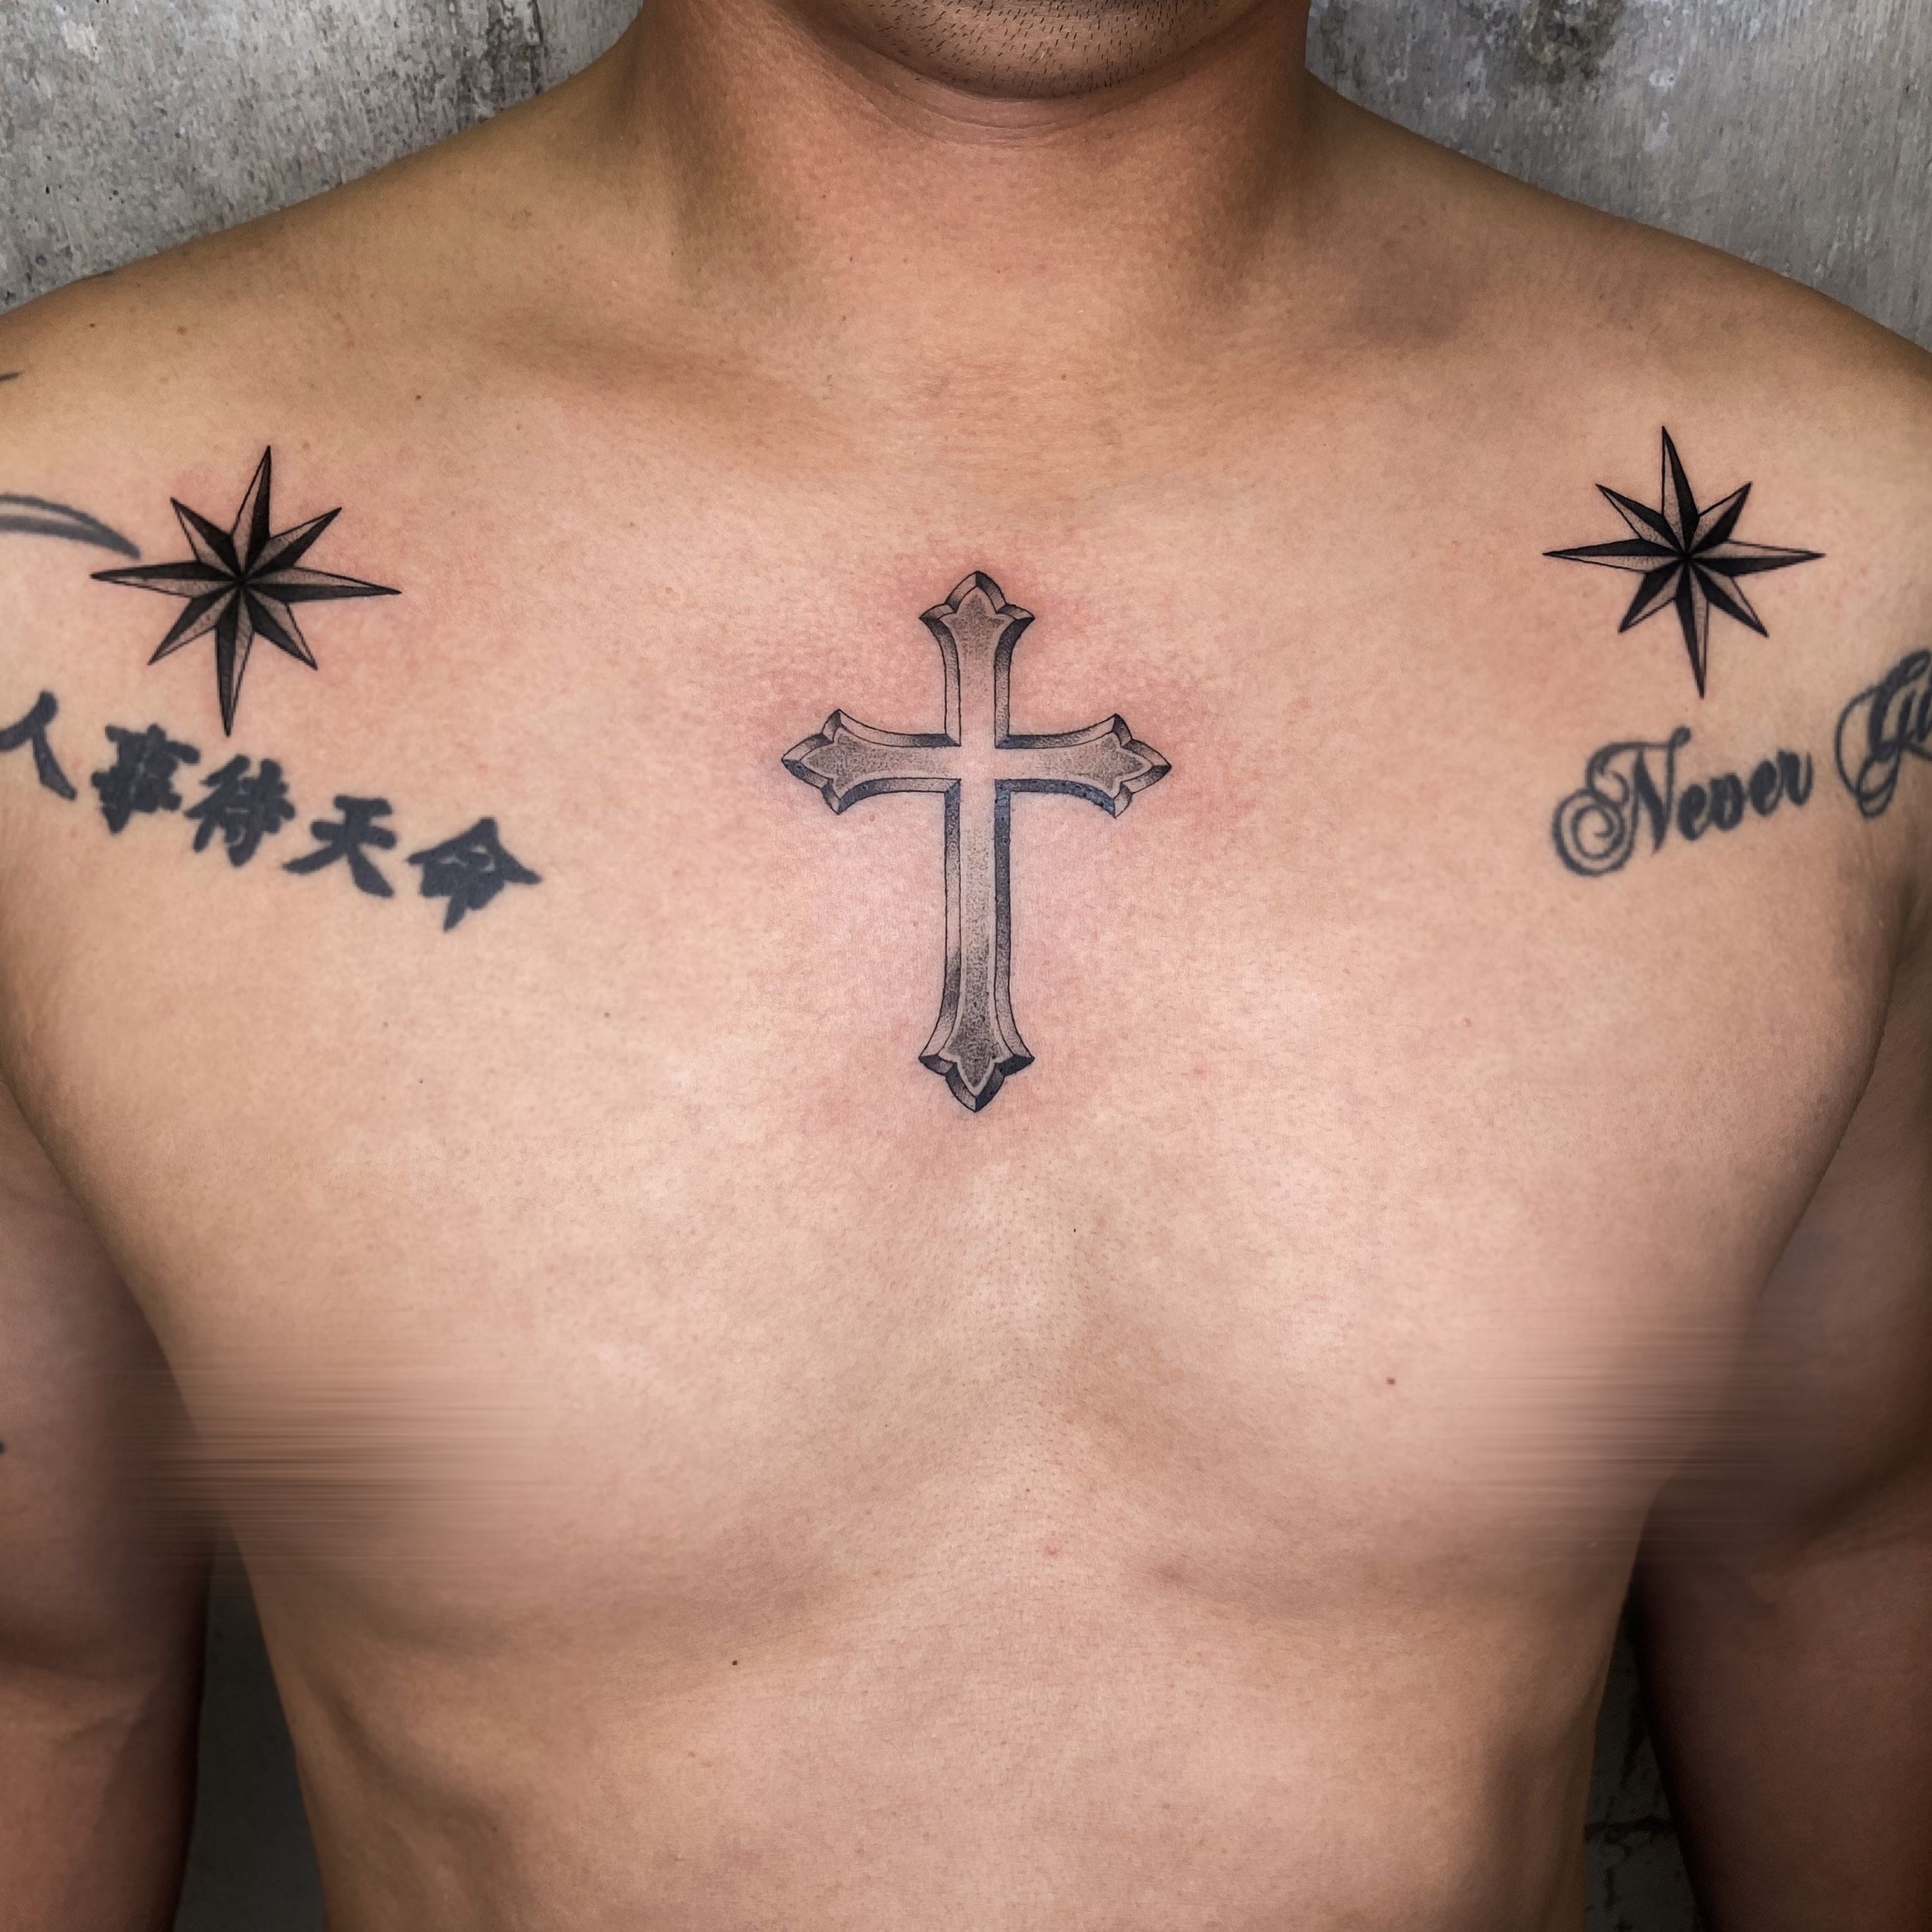 Meaning of a Cross on the chest tattoo